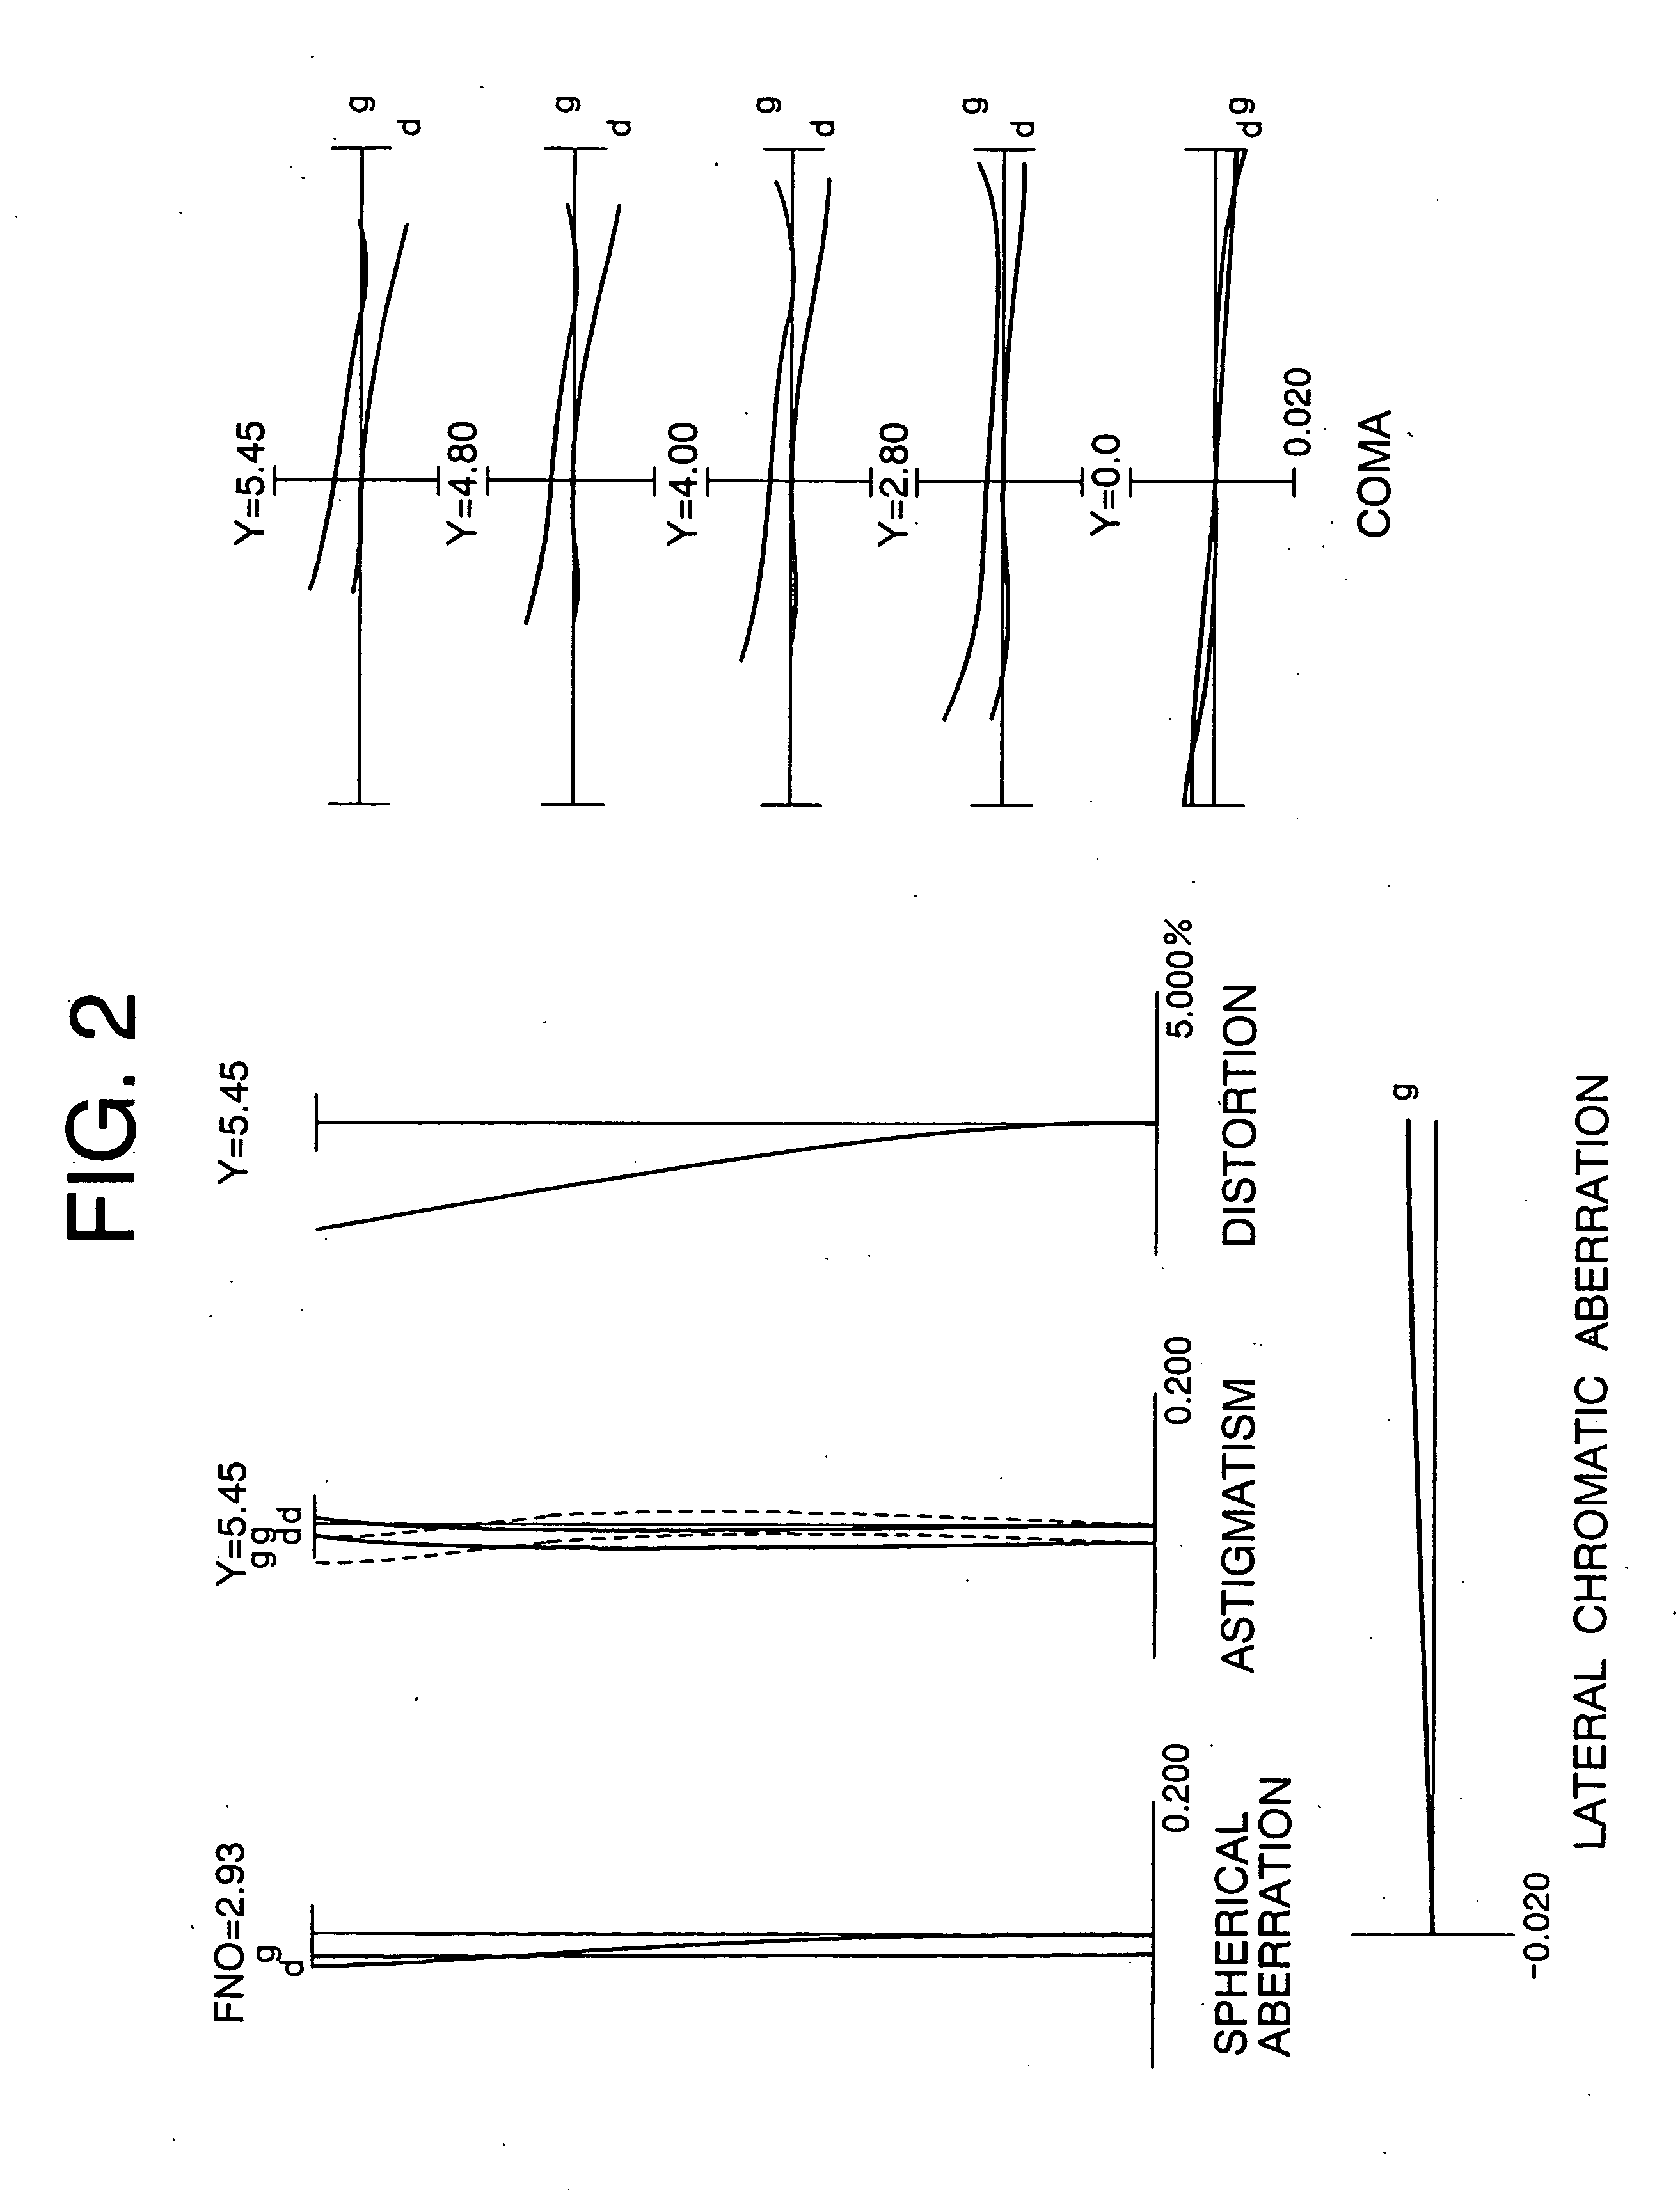 Optical system with wavelength selecting device